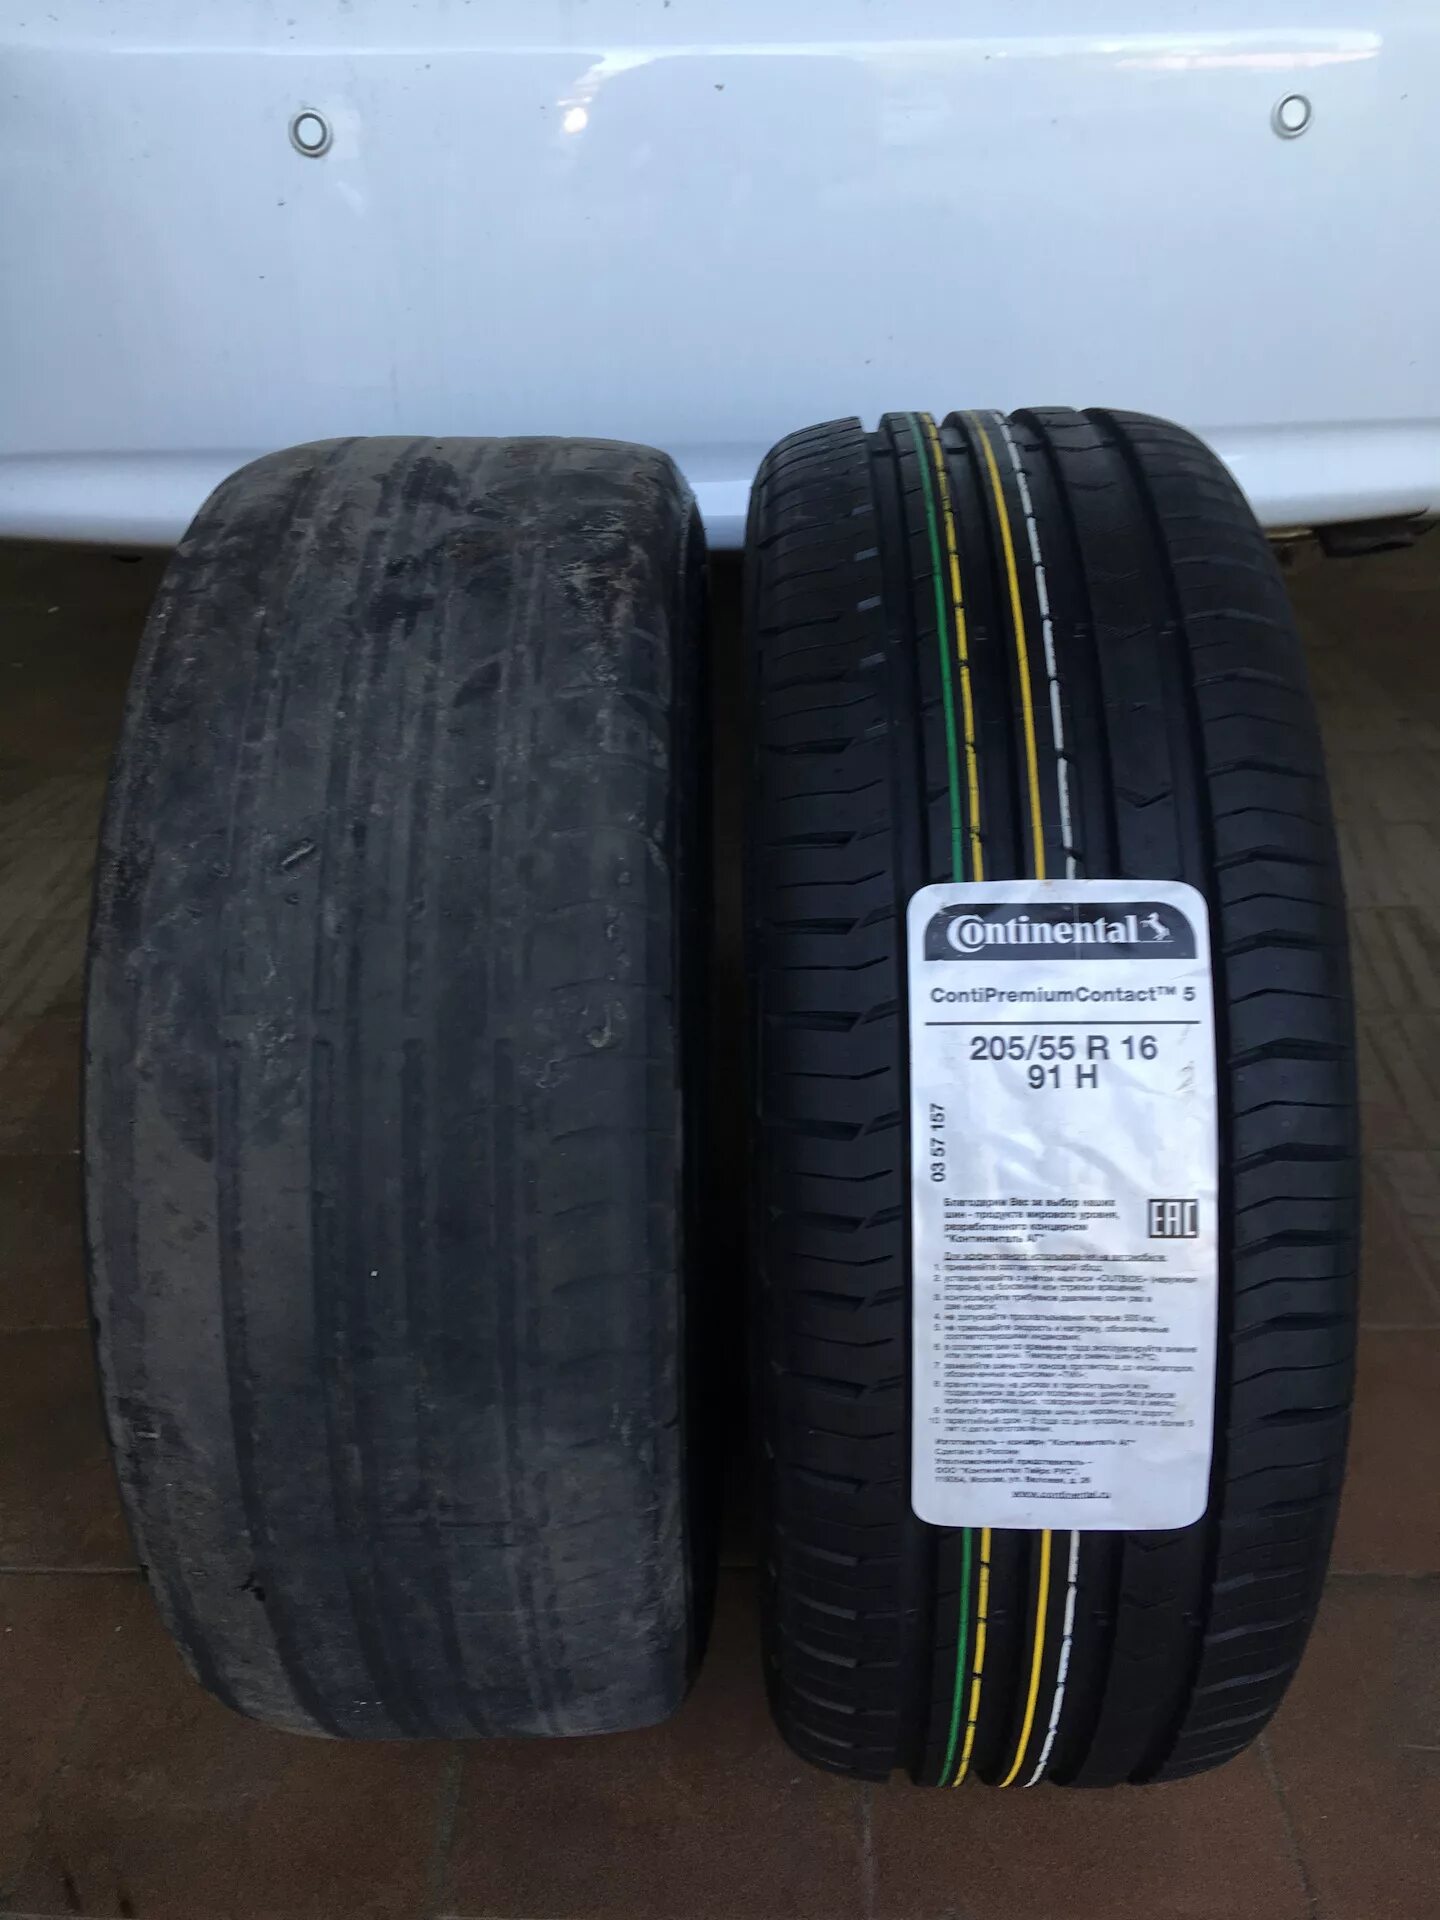 Continental PREMIUMCONTACT 205/55 r16. Continental PREMIUMCONTACT 5 205/55 r16. Continental CONTIPREMIUMCONTACT 205/55 r16. Continental PREMIUMCONTACT 6 205/55 r16. Continental contipremiumcontact 6 205 55 r16